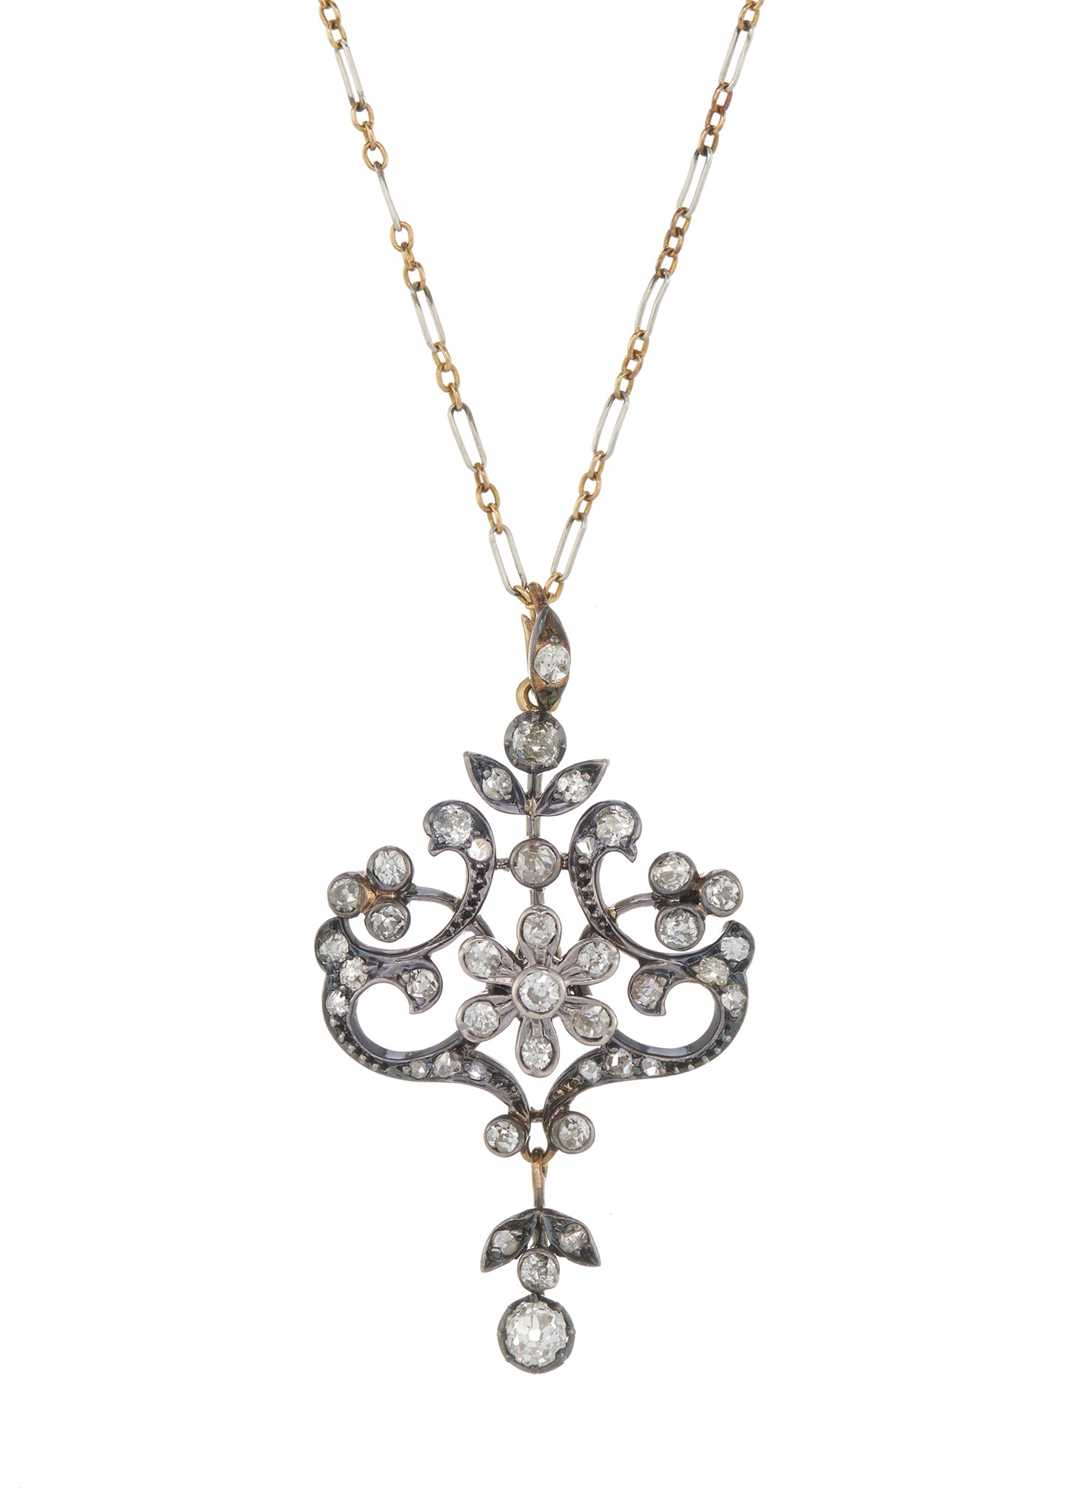 A Belle Epoque silver and gold diamond pendant, with chain